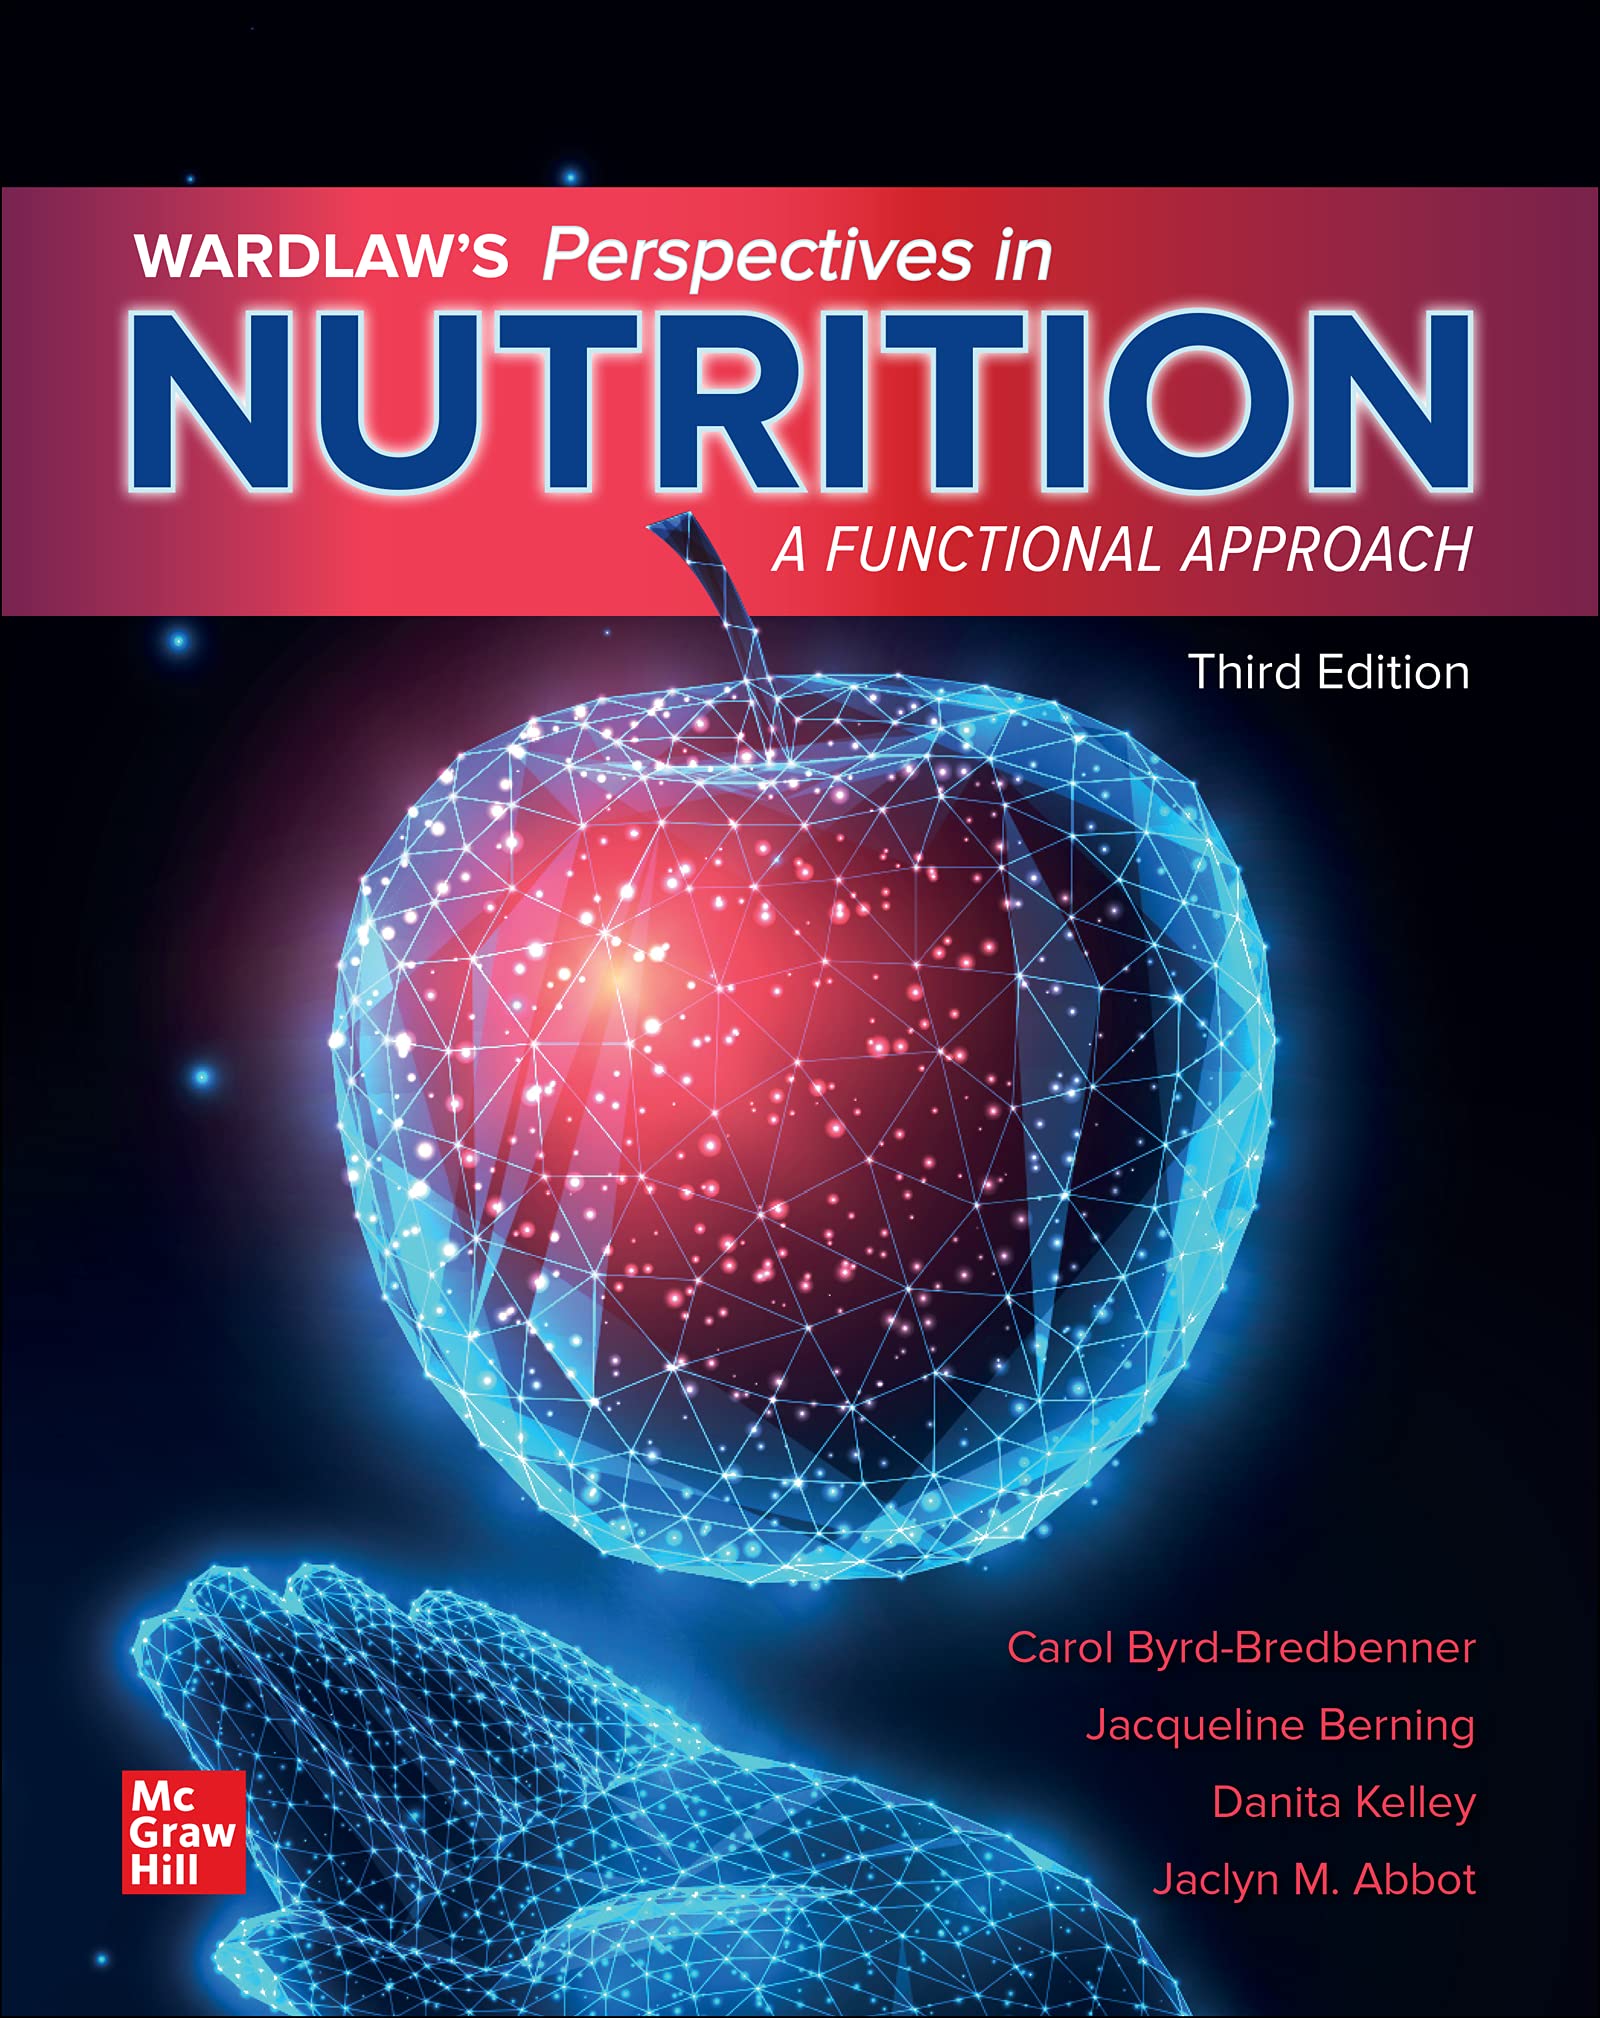 nutrition perspectives (research paper)